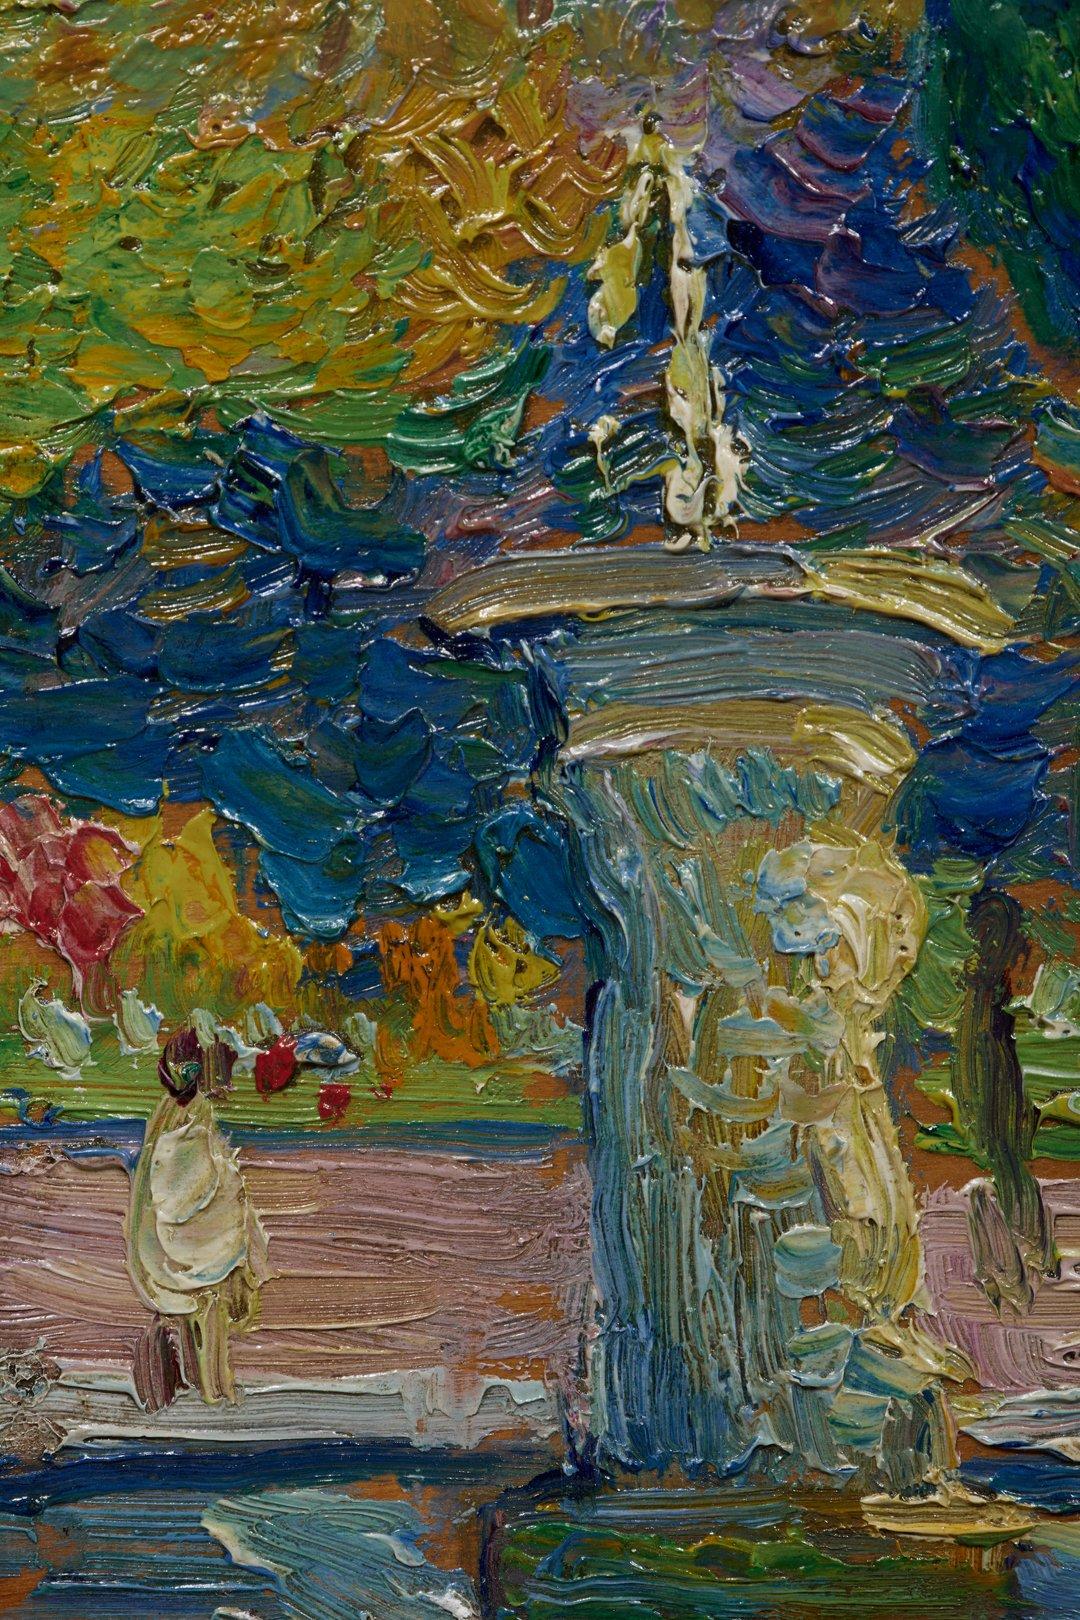 Abel Warshawsky (American, 1883-1962)
The Luxembourg Gardens, Paris, 1909
Oil on panel
Signed and dated lower right, titled verso
8.5 x 10.5 inches
13.75 x 16 inches, framed

Impressionist painter A.G. Warshawsky was active in Cleveland, Paris and